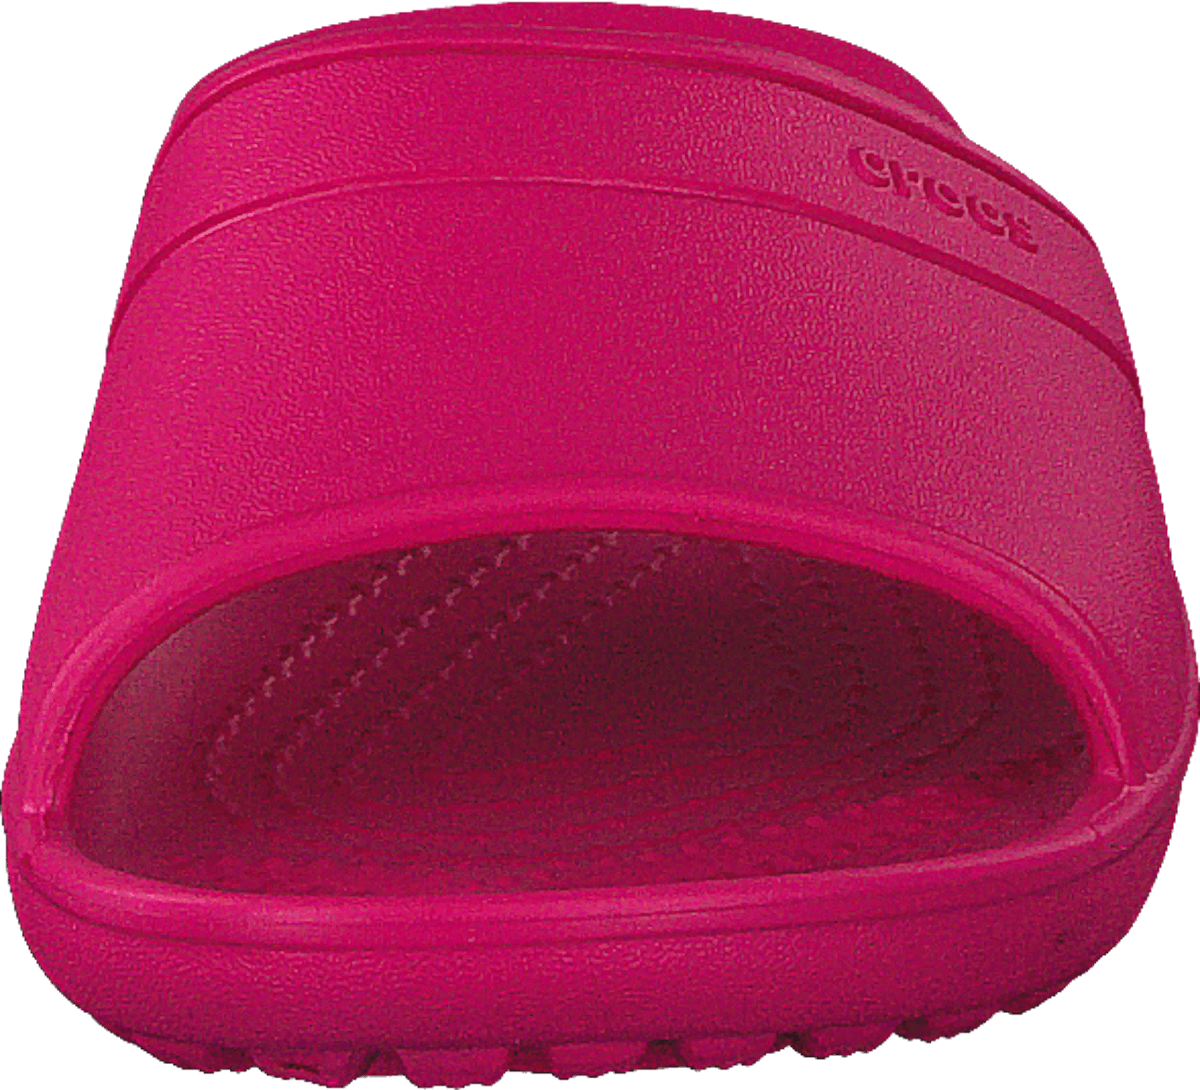 Classic Slide K Candy Pink